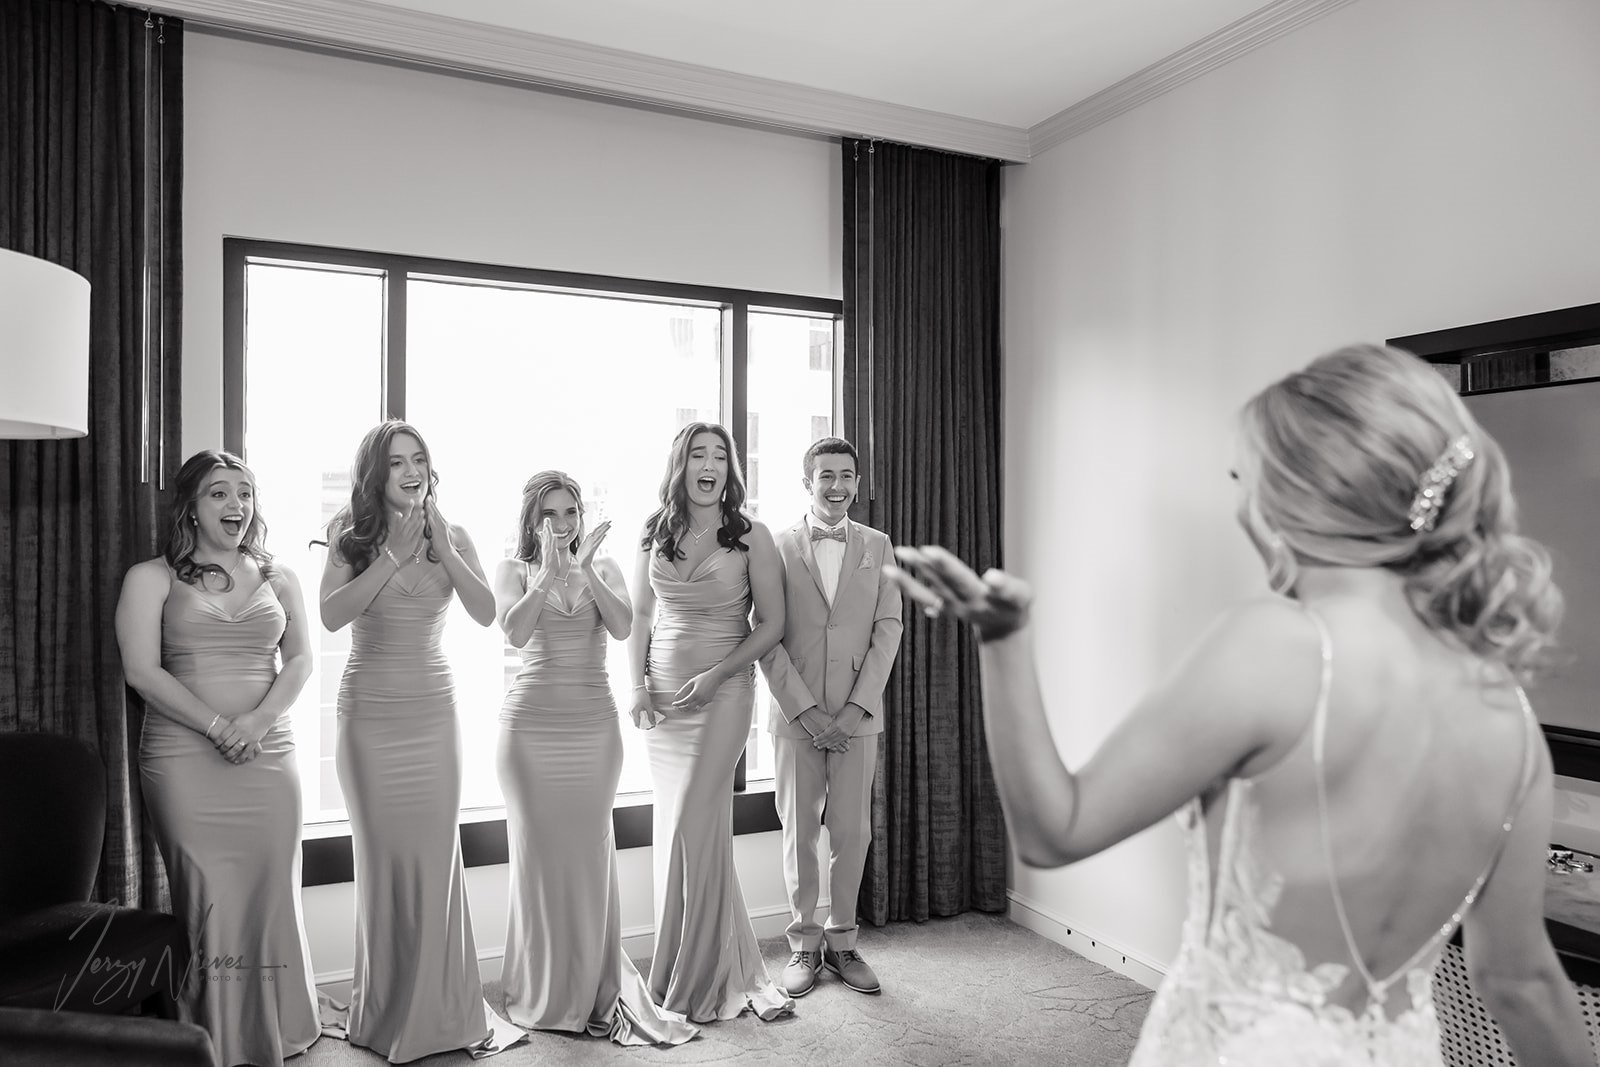 Black and white photograph capturing the emotional reaction of the bridal party as they see the bride in her dress after hair and makeup, taken from behind the bride.